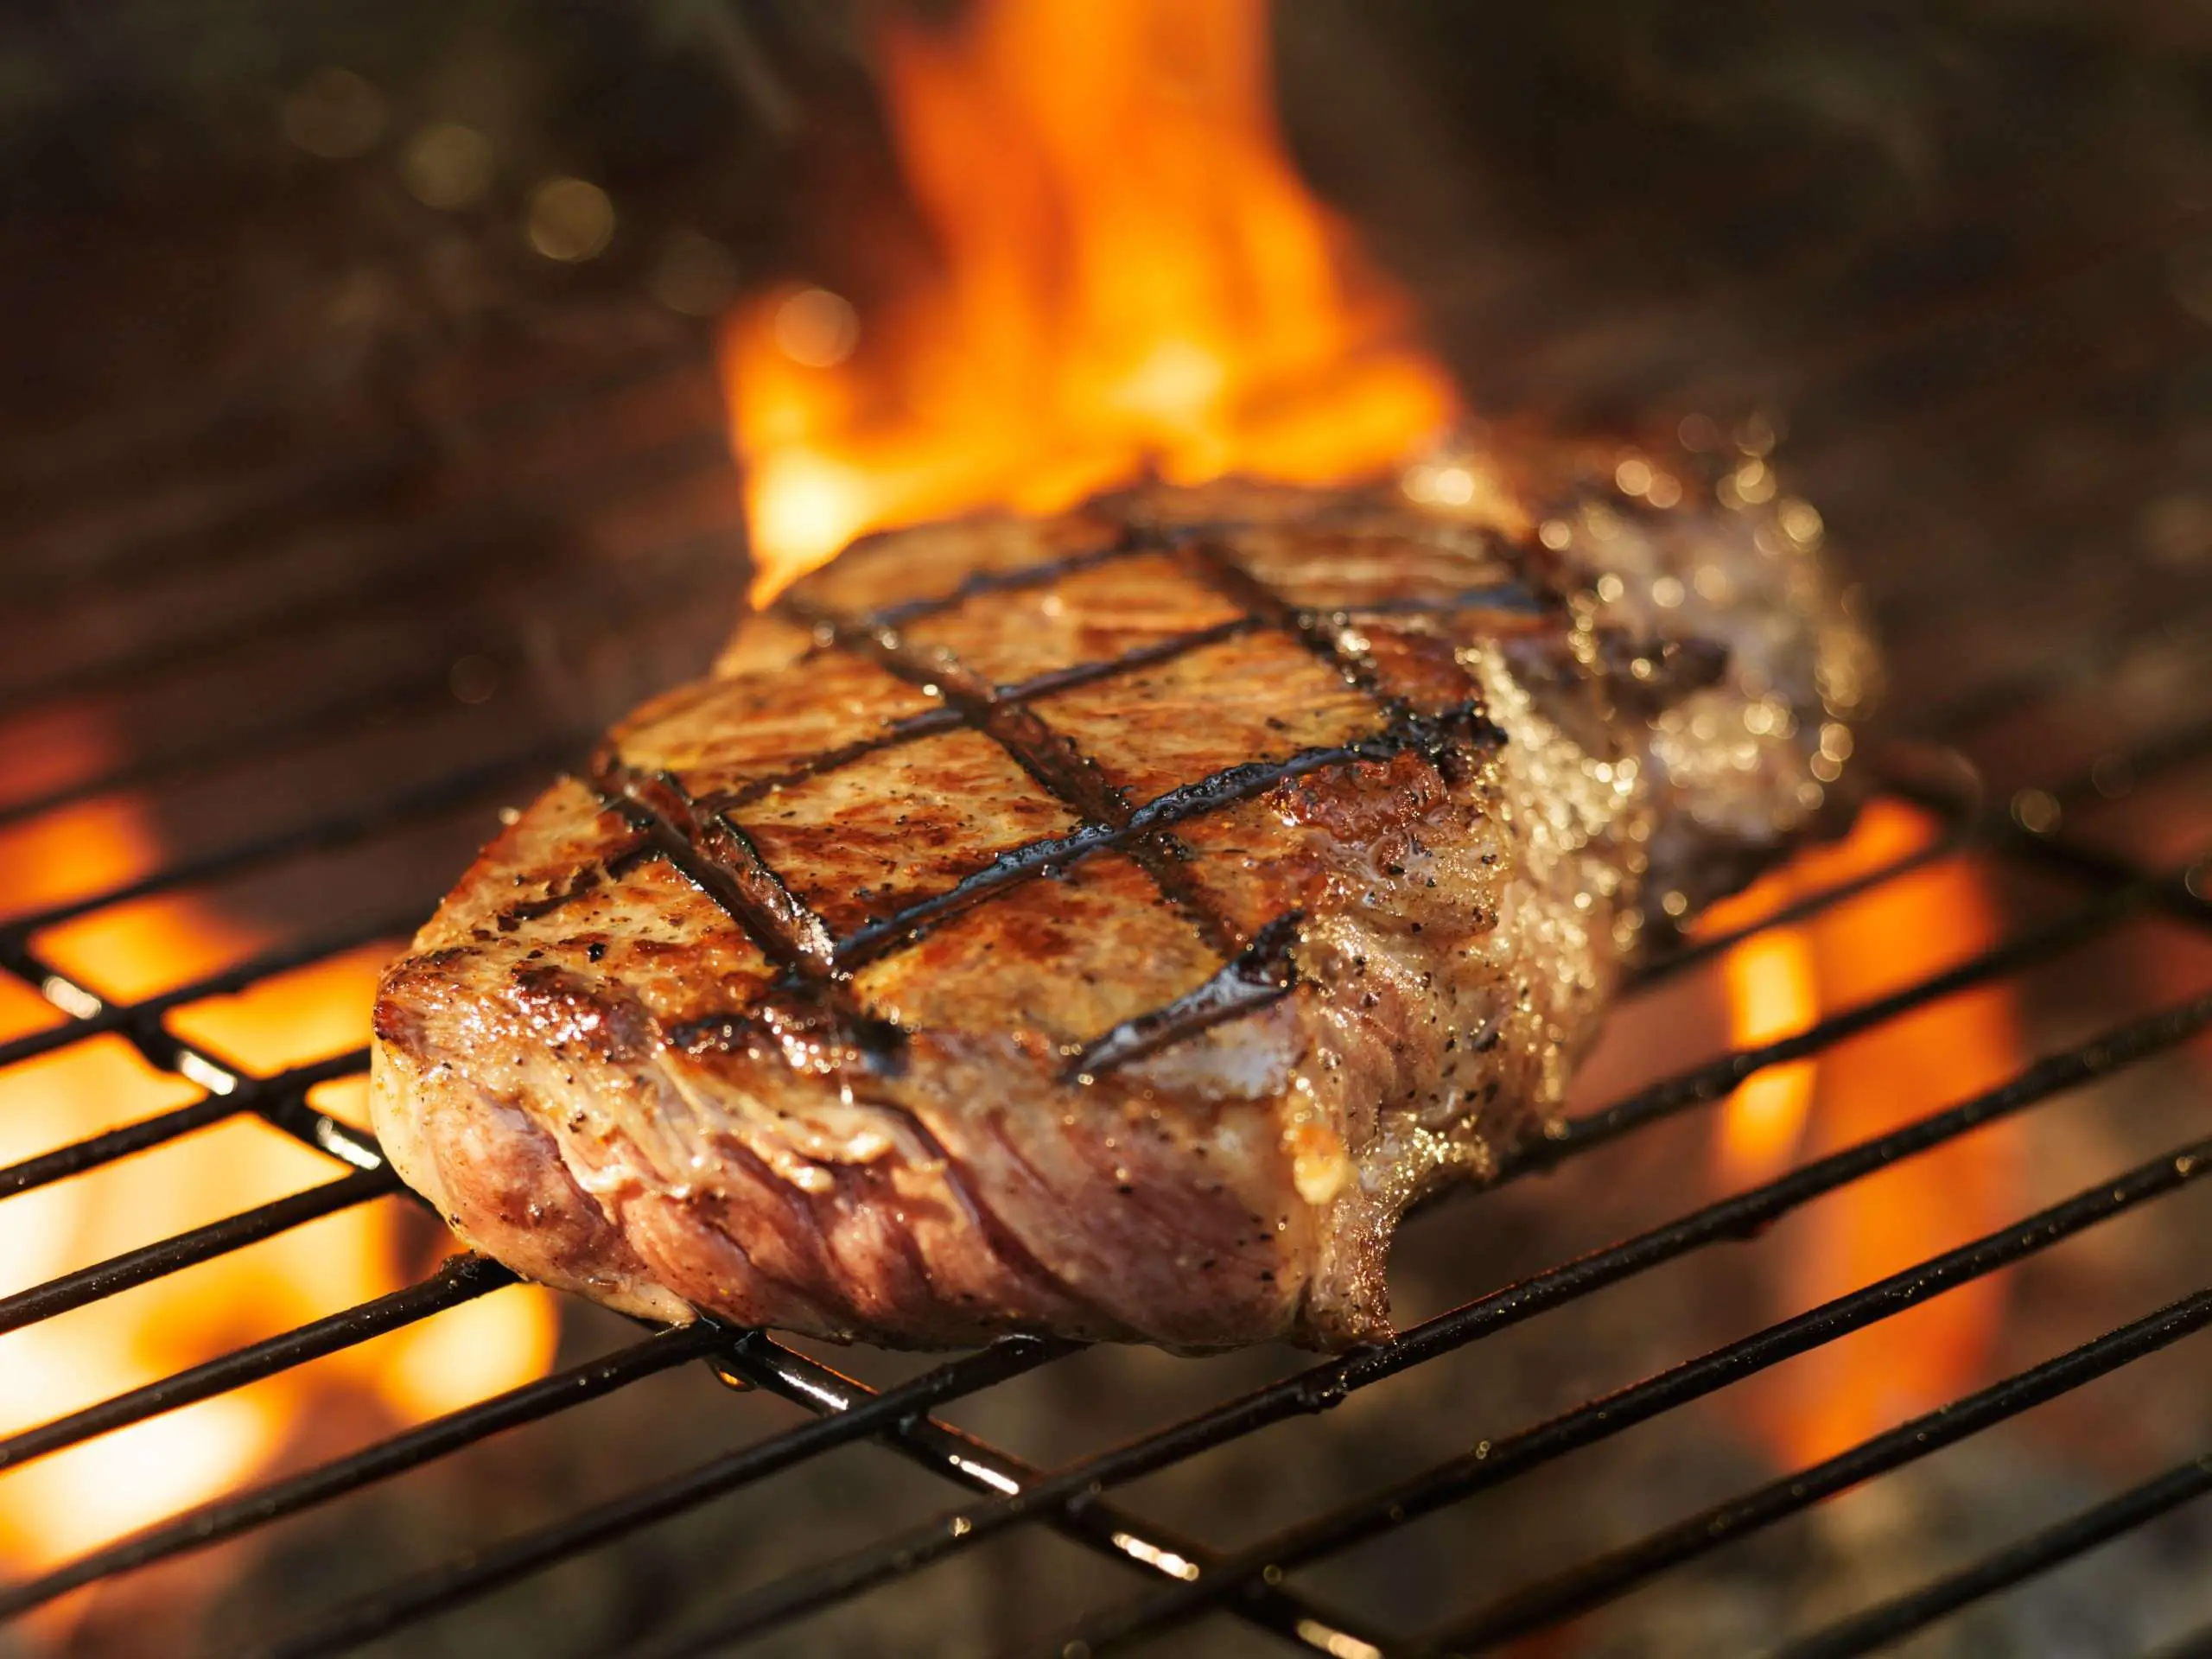 Steak Grilling Tips From the Pros